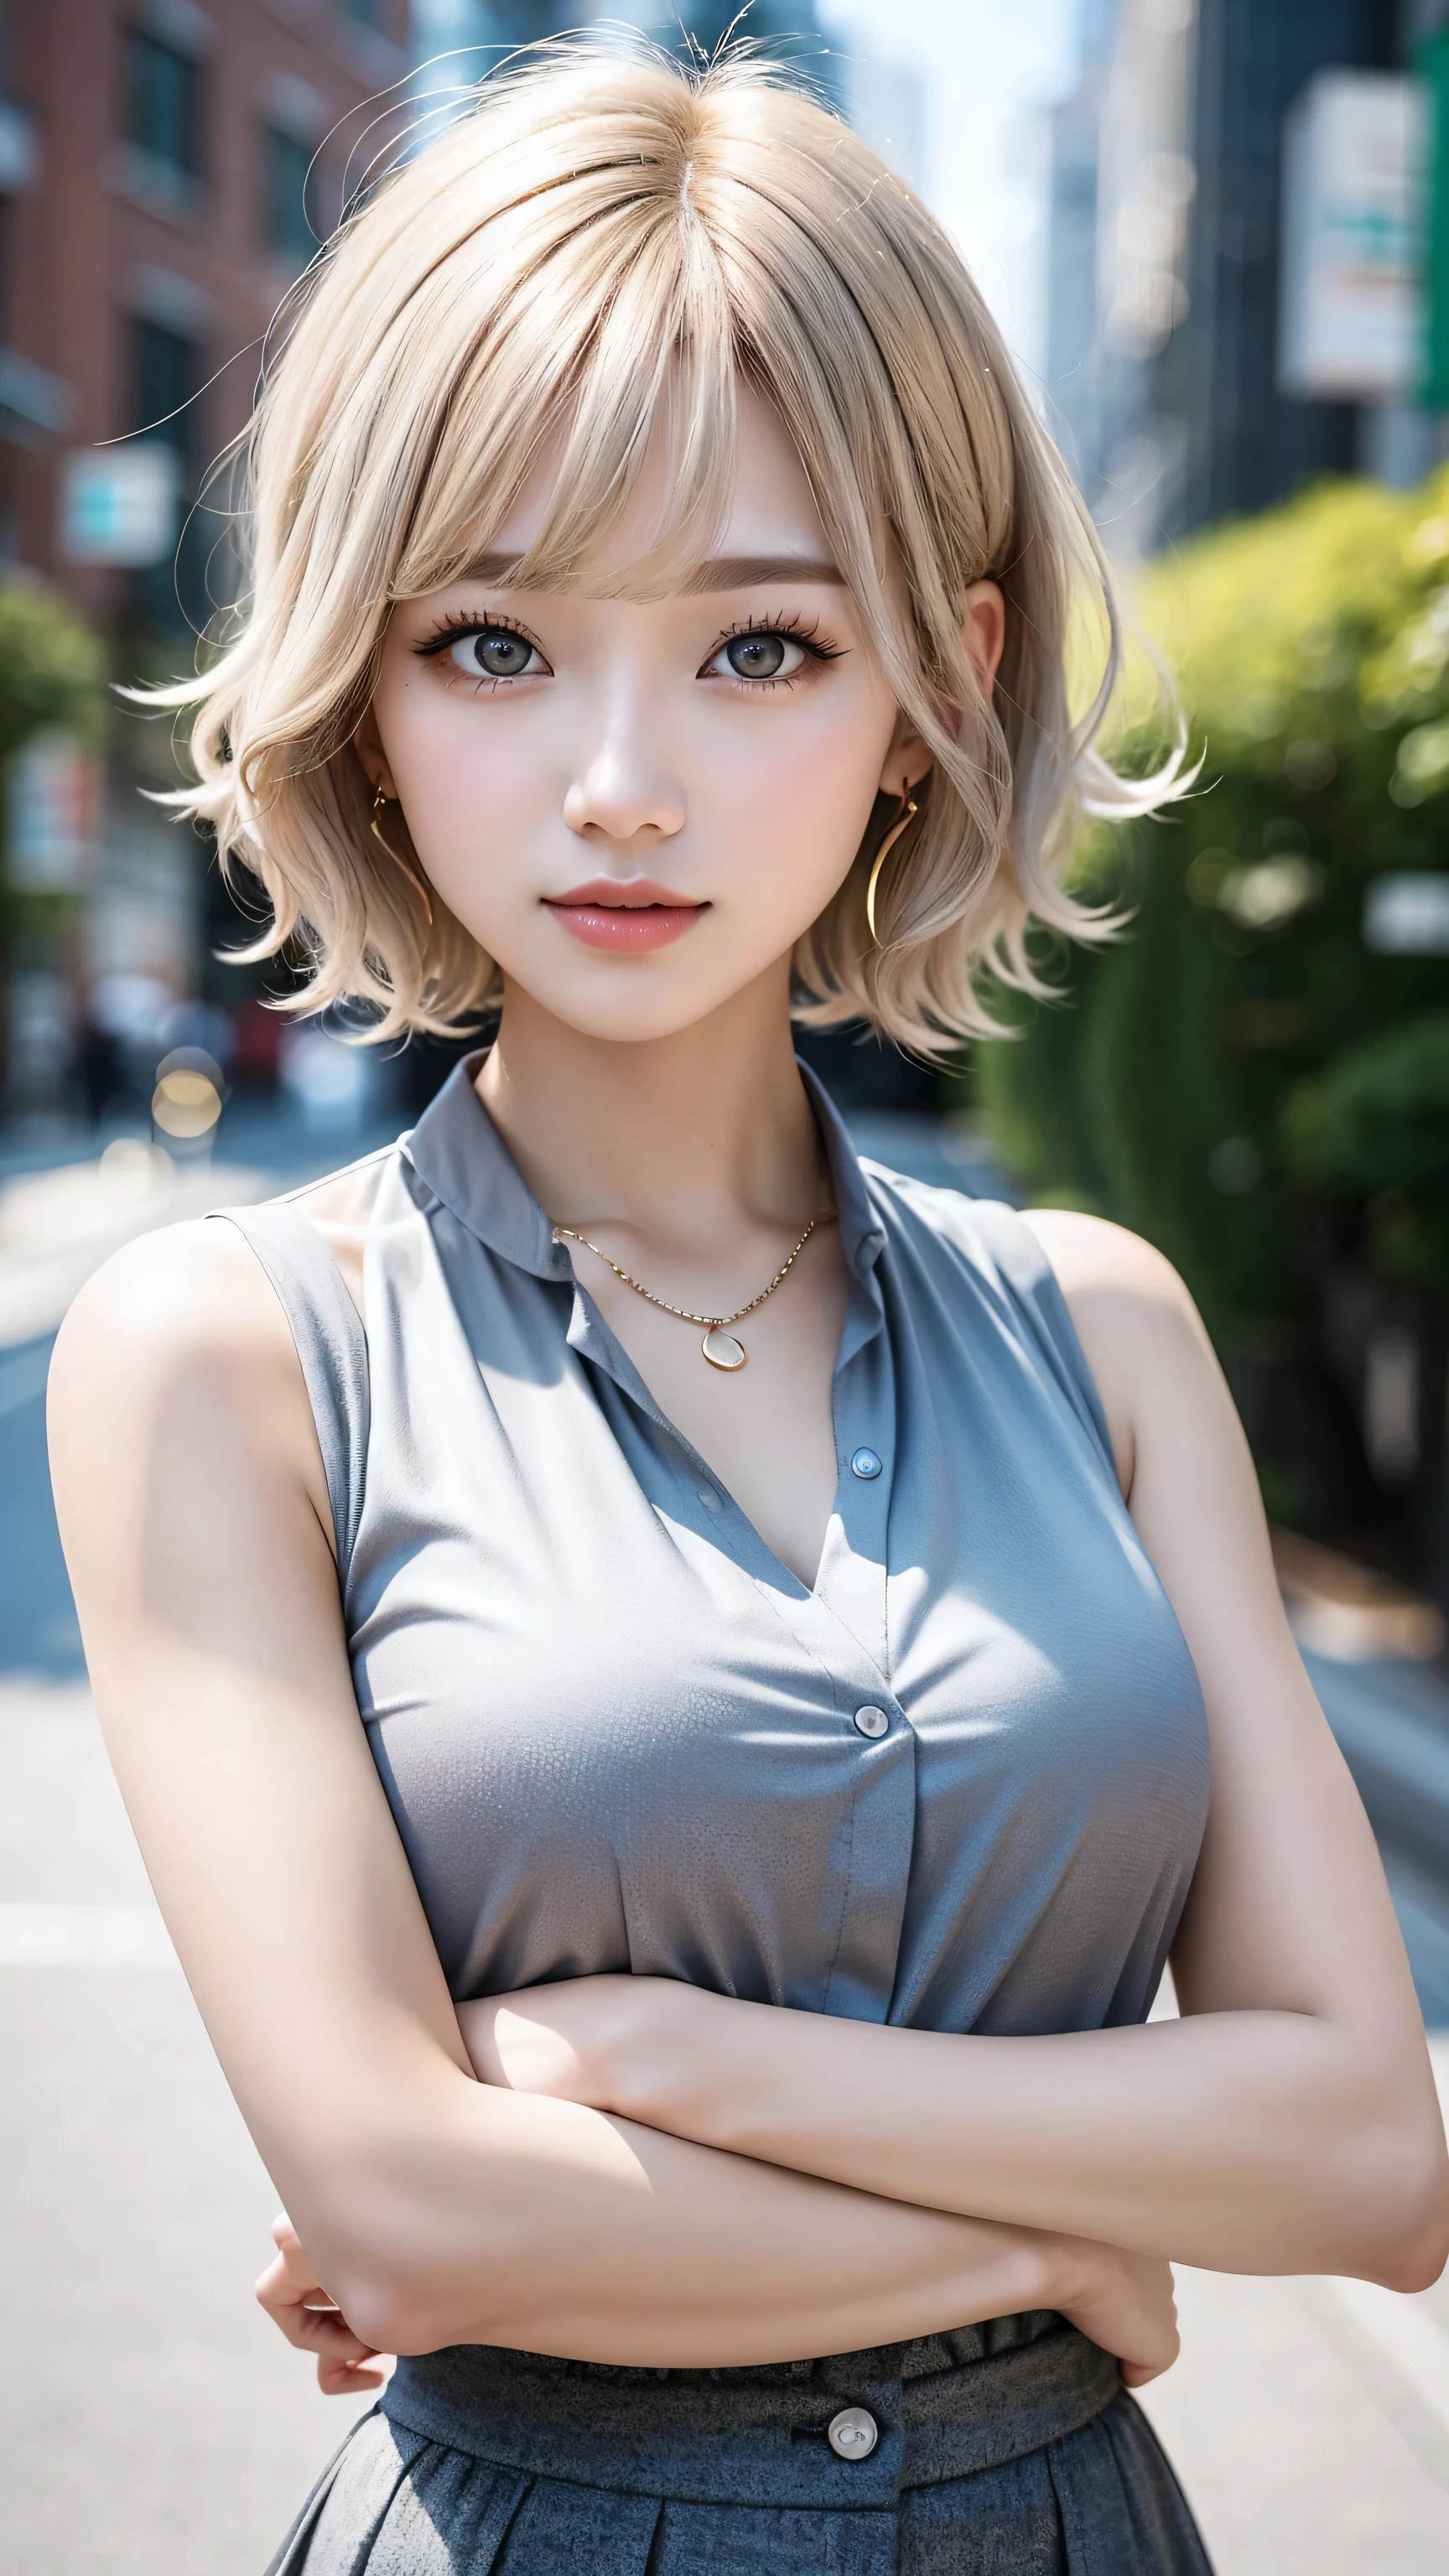 Curly Bob Cut, A platinum-haired woman in an orange collared shirt poses for a photo in the city, 8K Art Jam Bokeh, well-proportioned body, Beautiful Korean women, Gorgeous Necklace, Beautiful young Korean women, Soft Portrait Shot 8k, Korean Girls, Double eyelids and narrow eyes, beautiful grey eyes, Trans8K, Cute young woman, Korean women, Beautiful blonde girl